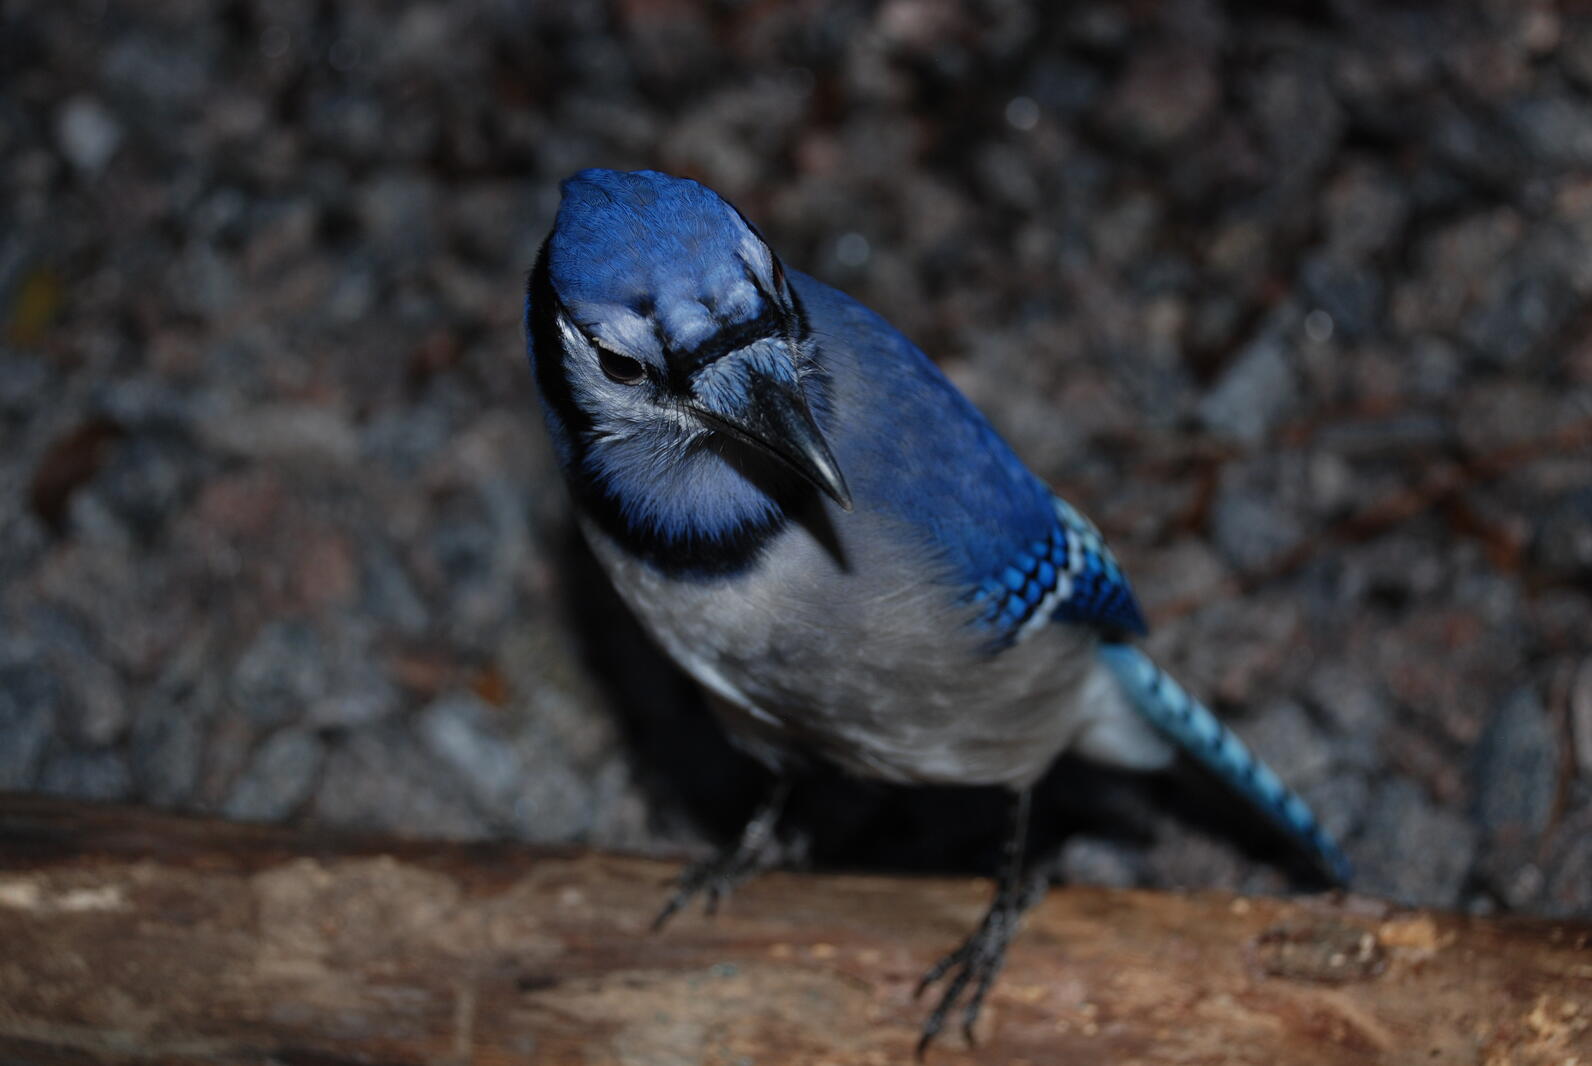 John Jay, Beidler's resident Blue Jay outside in his aviary. The ground is covered with pieces of stone and as he shows off his contrasting hues of blue plumage. 